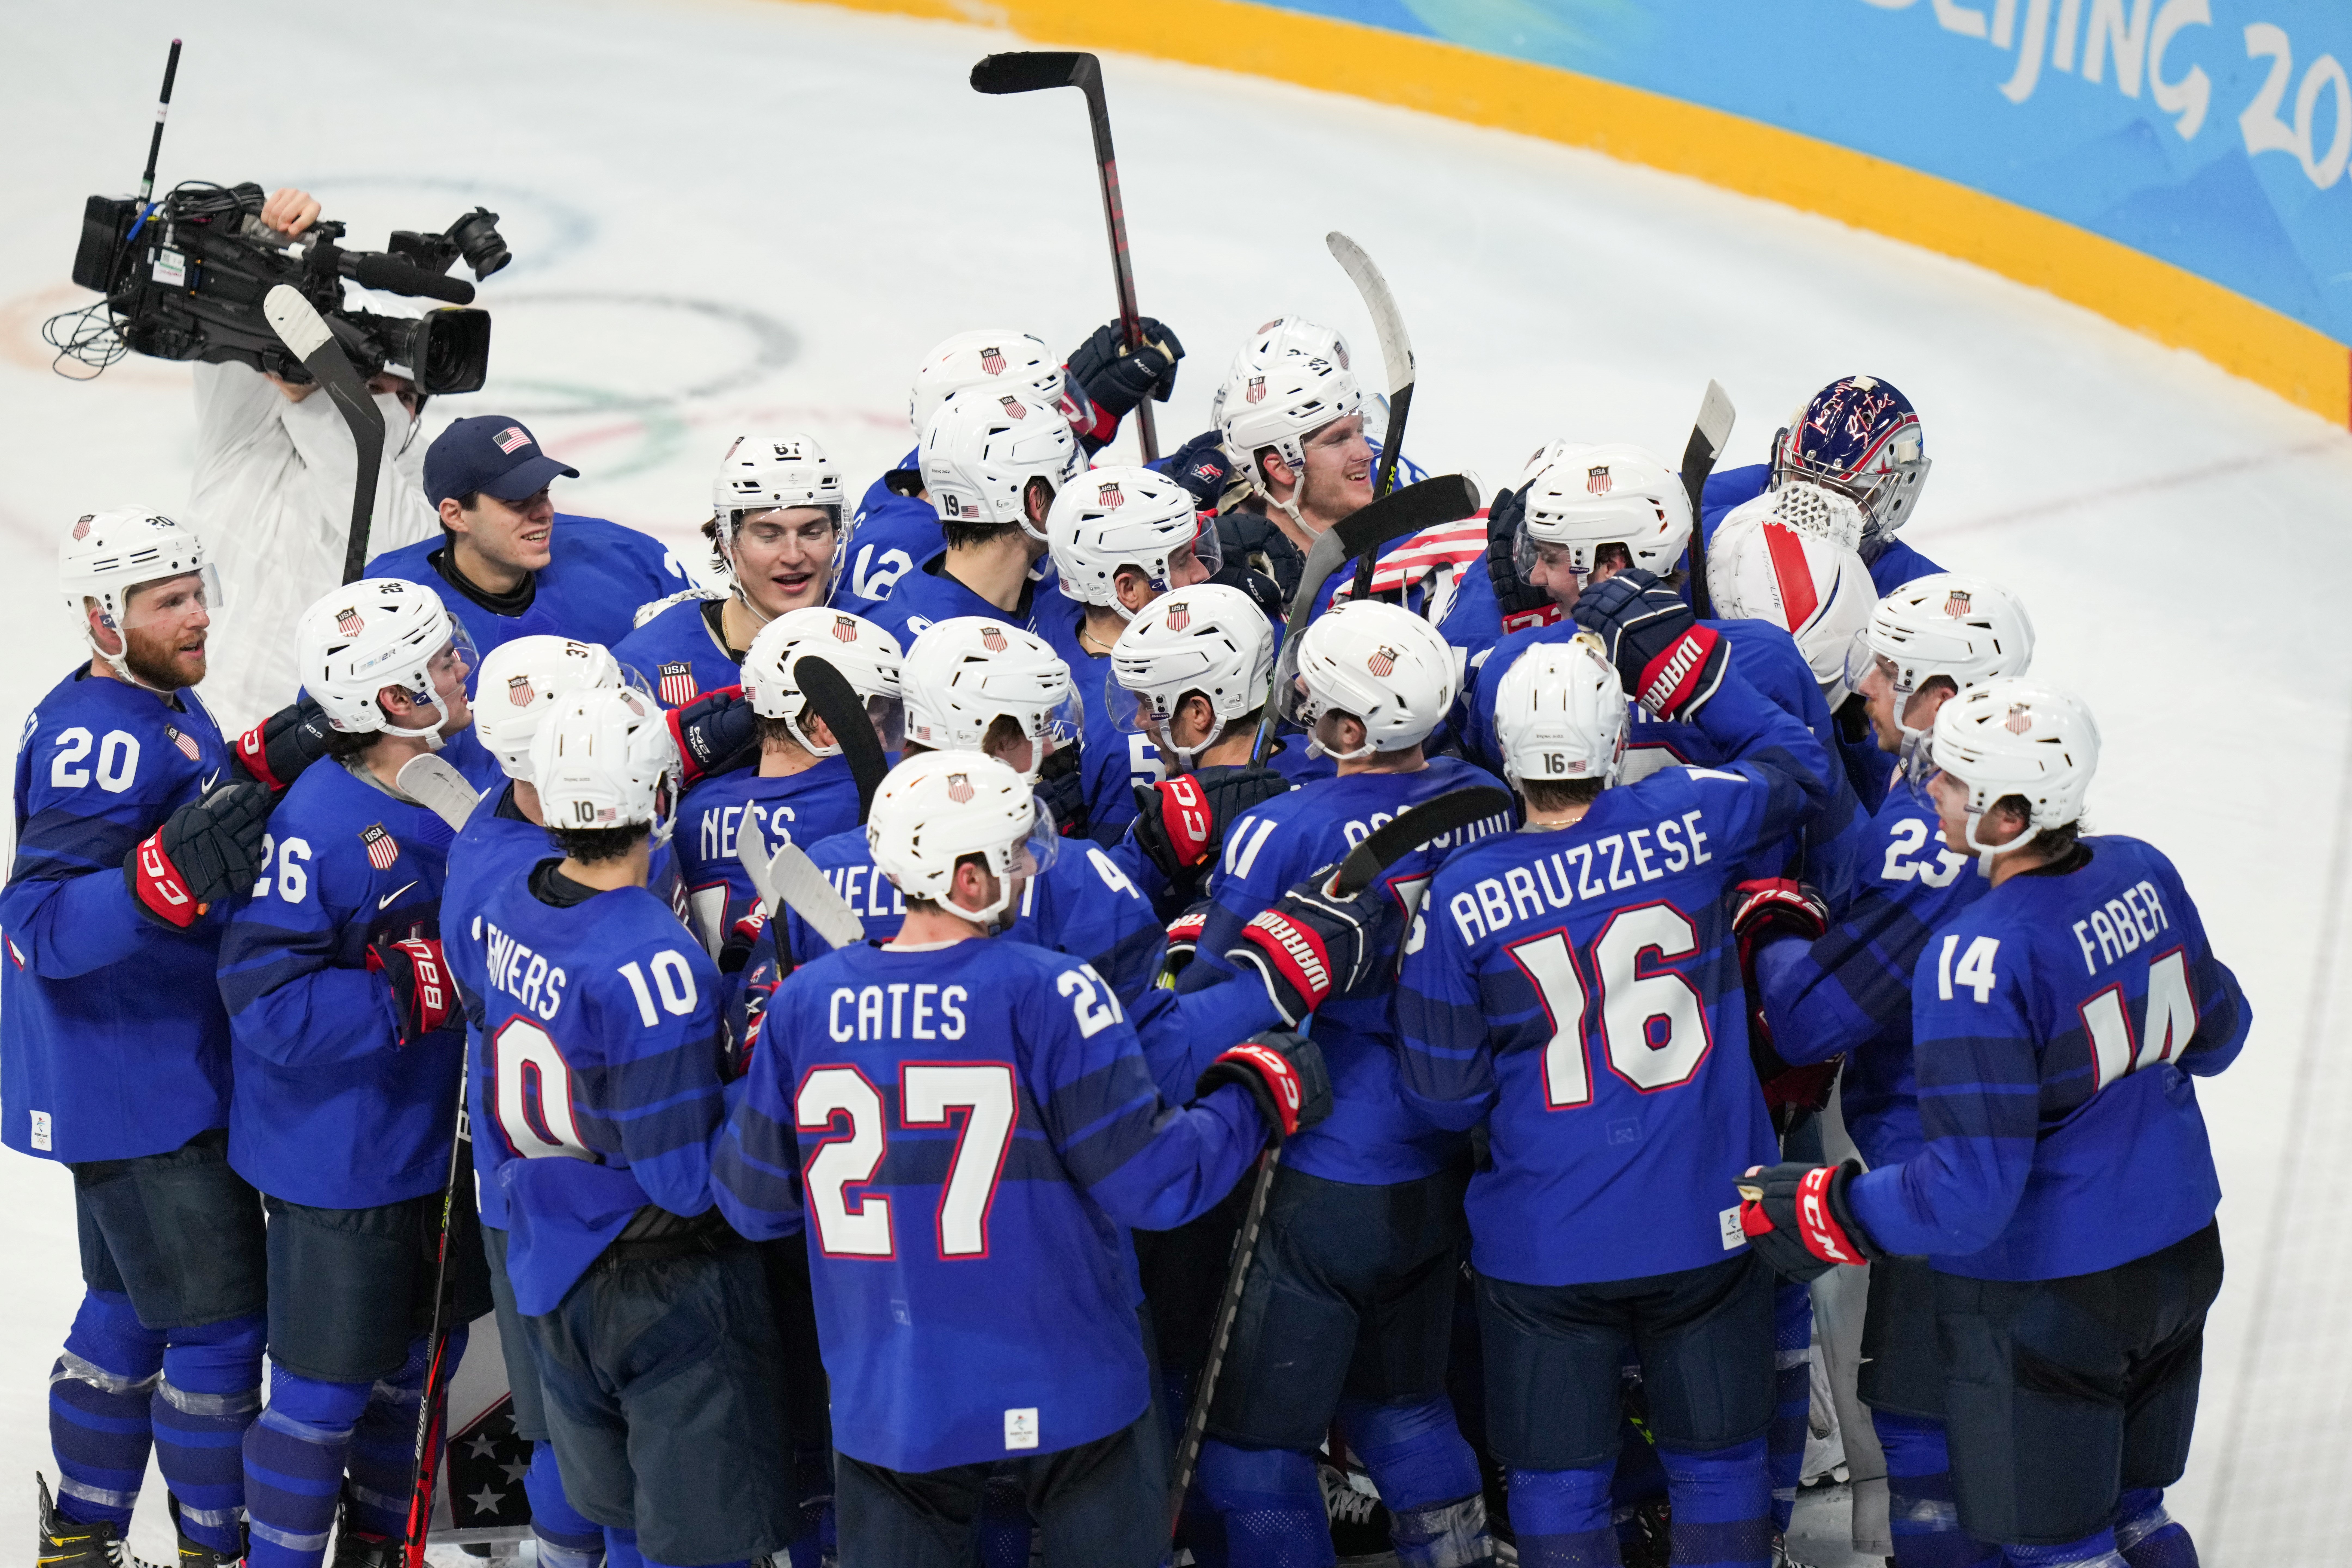 Athletes of the United States celebrate winning the ice hockey men’s preliminary round Group A match between the United States and Germany at Wukesong Sports Centre in Beijing, capital of China, Feb.13, 2022.